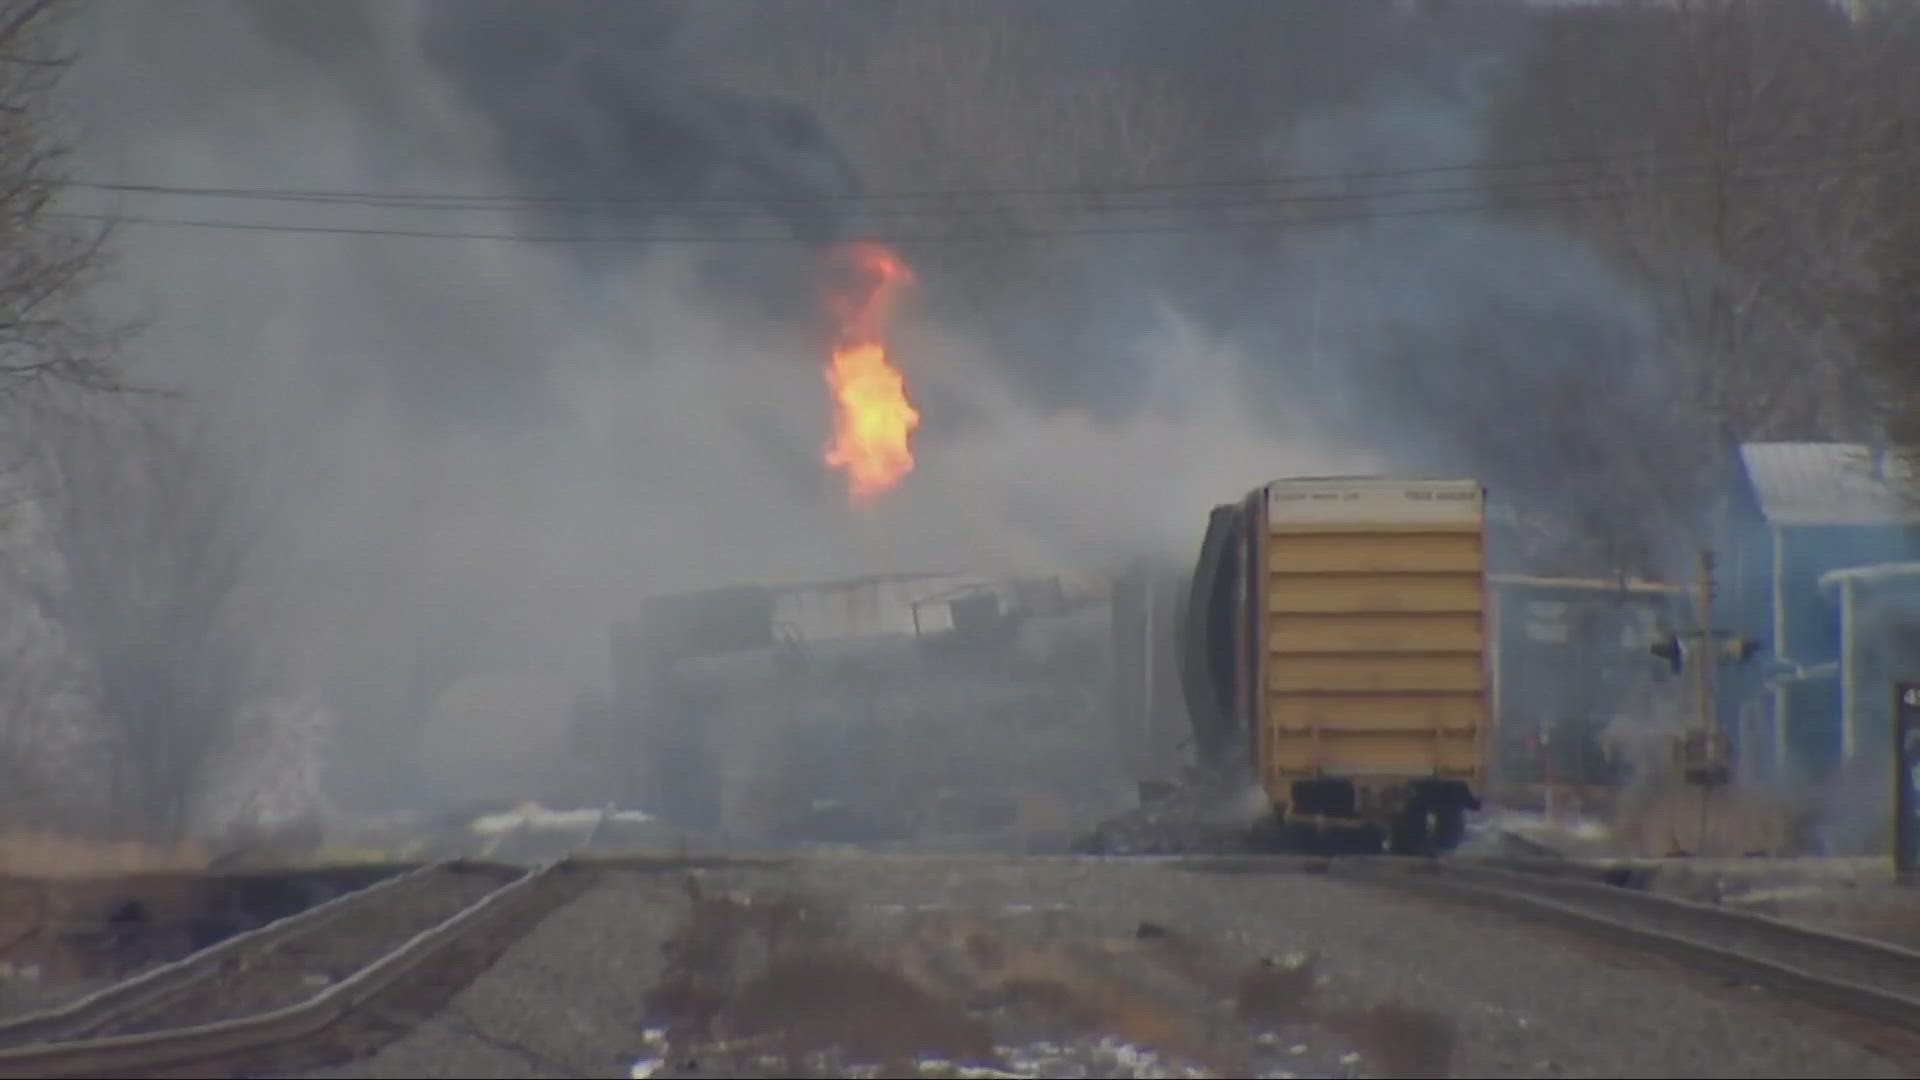 A massive train derailment in Ohio caused a fire that  led to an evacuation of East Palestine.